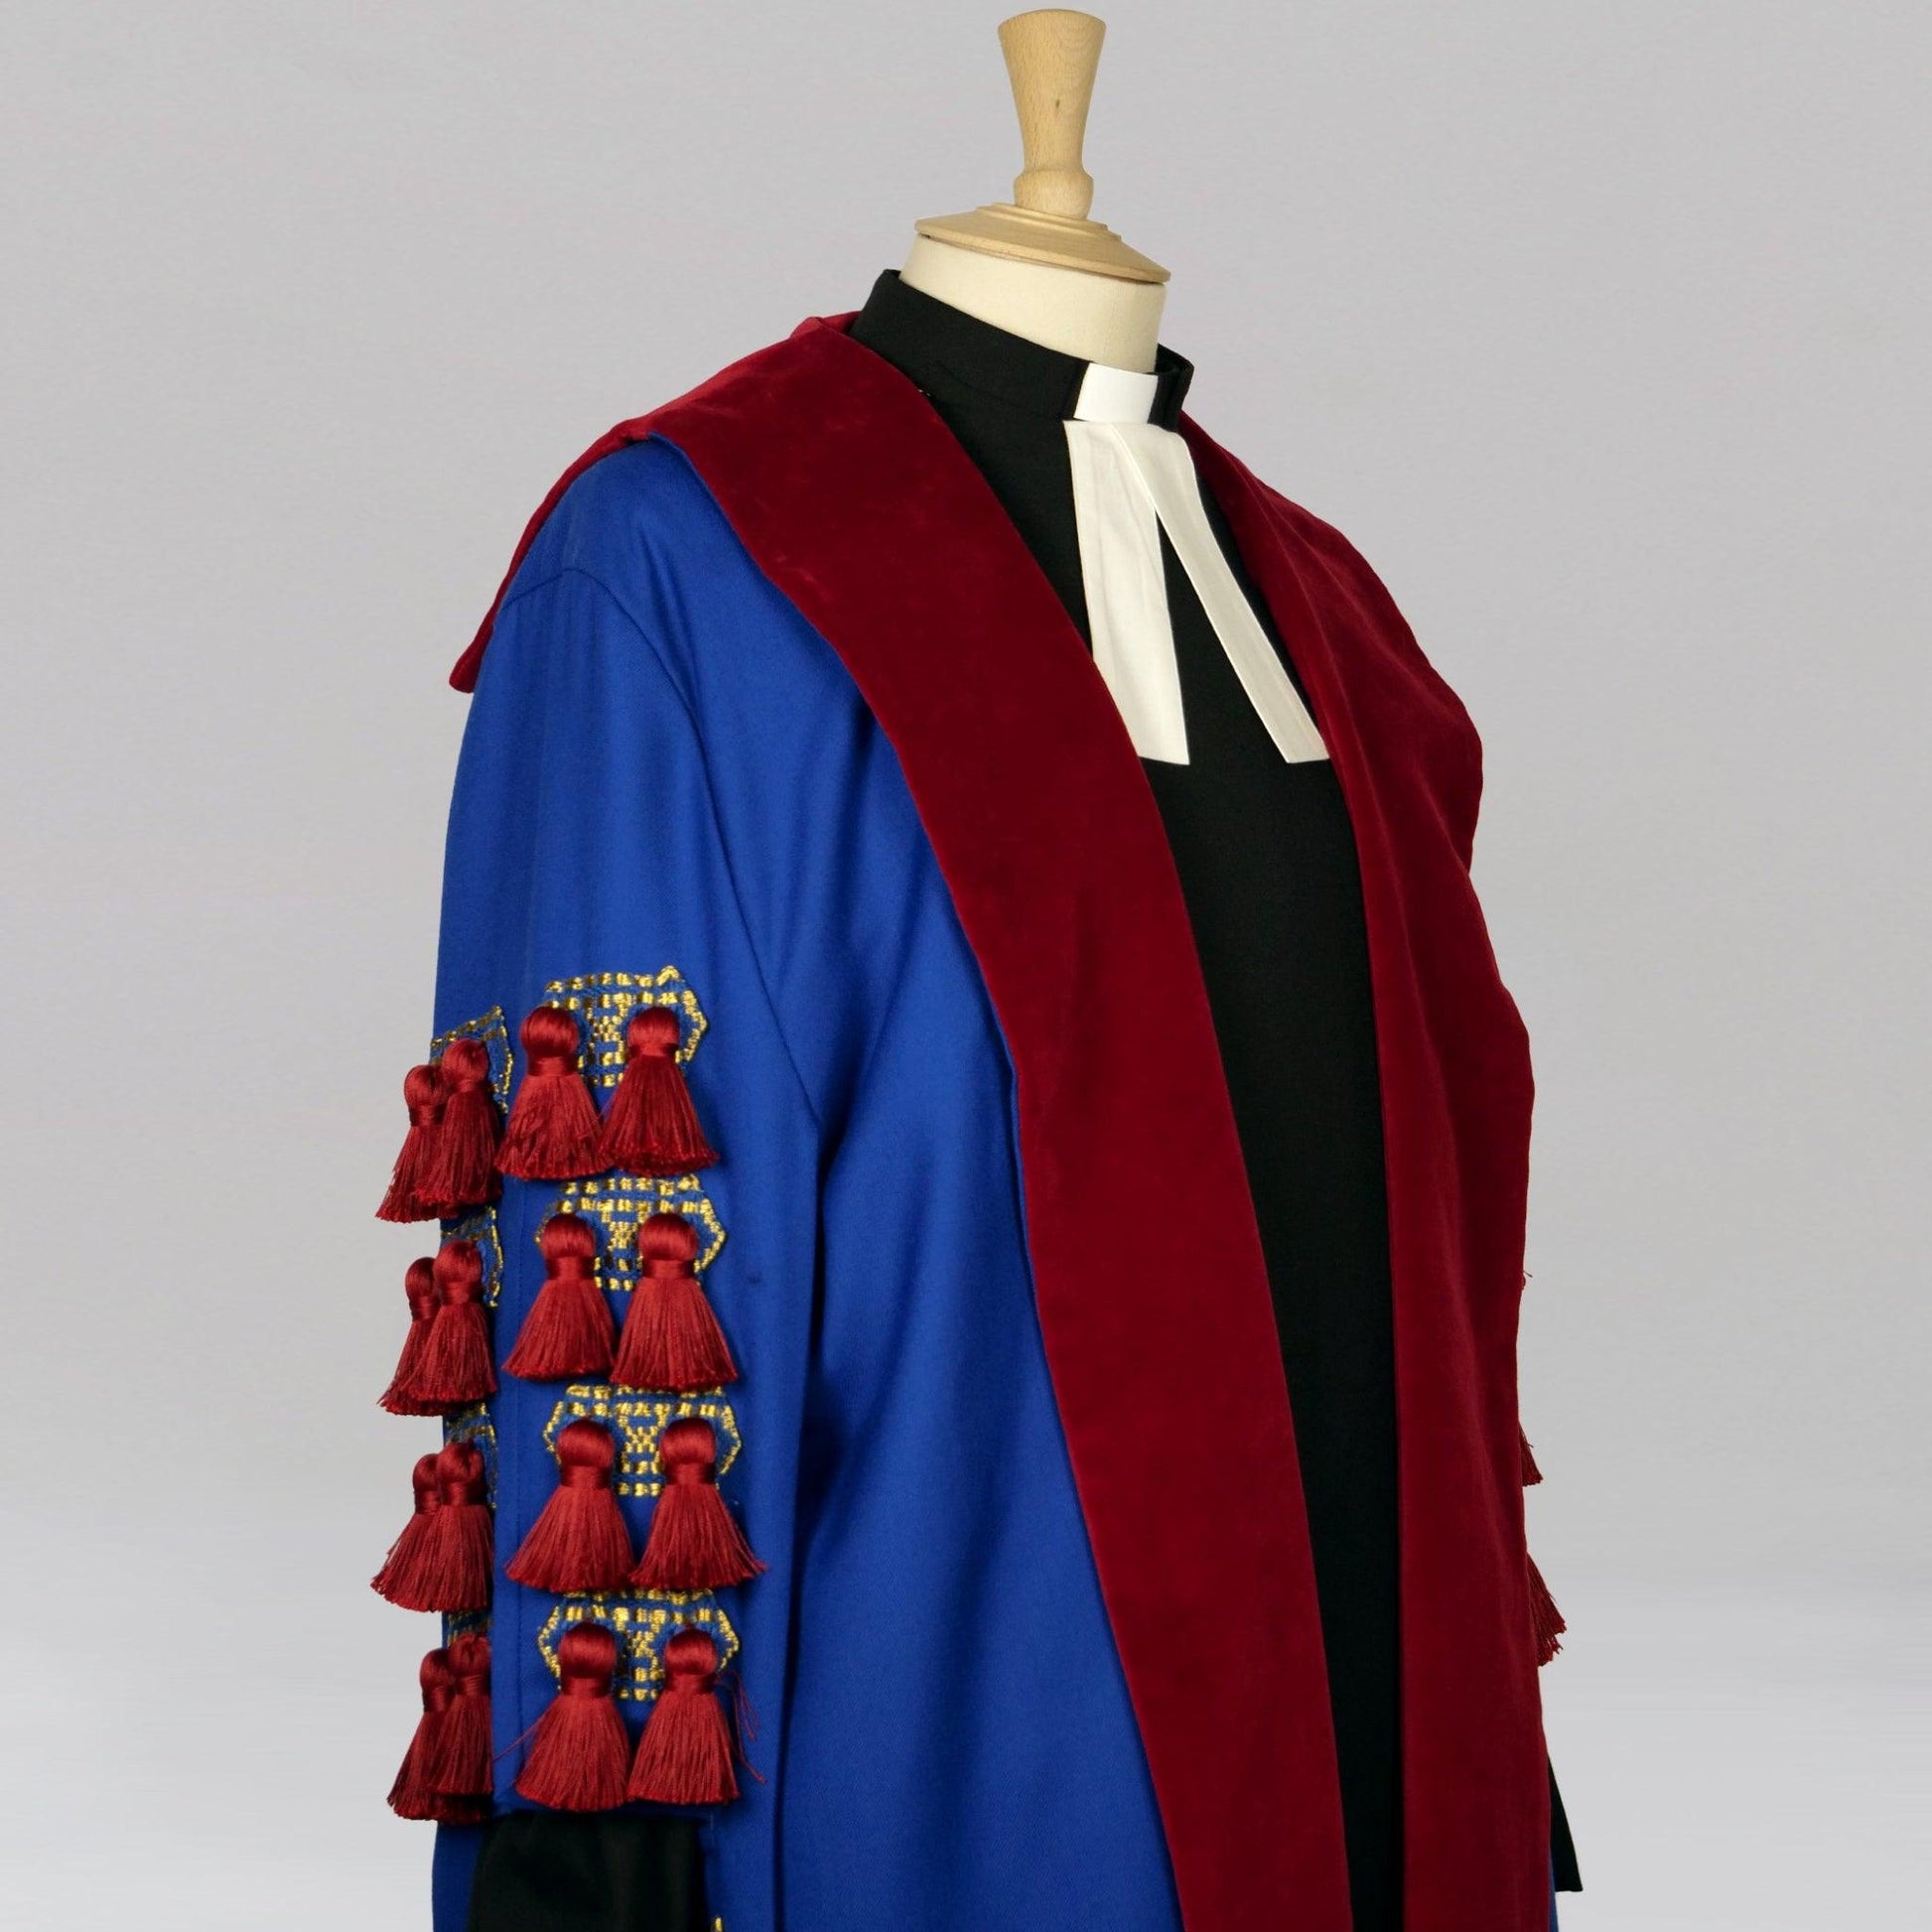 Bespoke Vergers Gown with Tassels - Watts & Co.